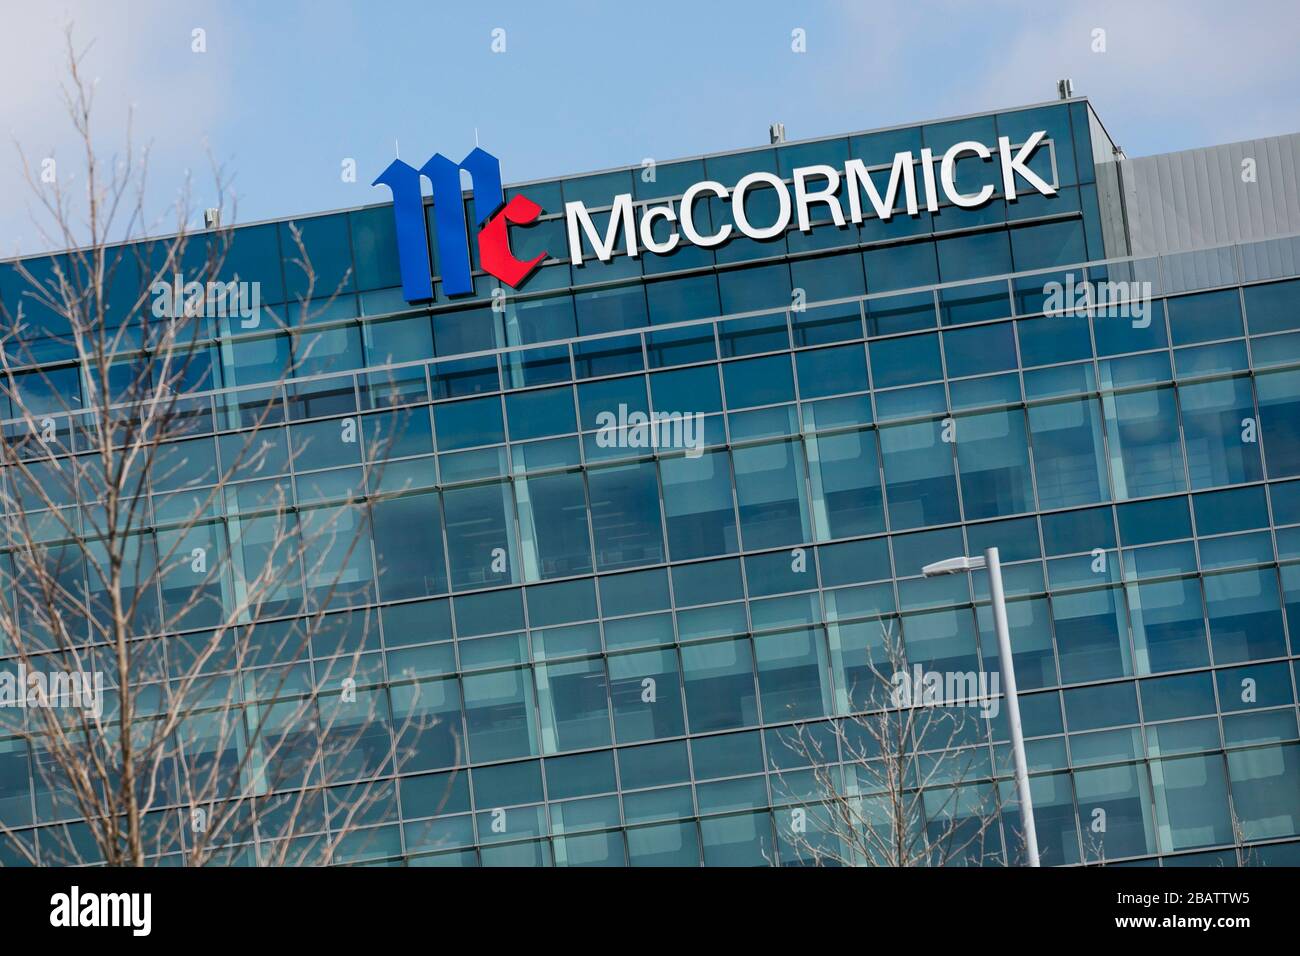 https://c8.alamy.com/comp/2BATTW5/a-logo-sign-outside-of-the-headquarters-of-mccormick-company-in-hunt-valley-maryland-on-march-26-2020-2BATTW5.jpg